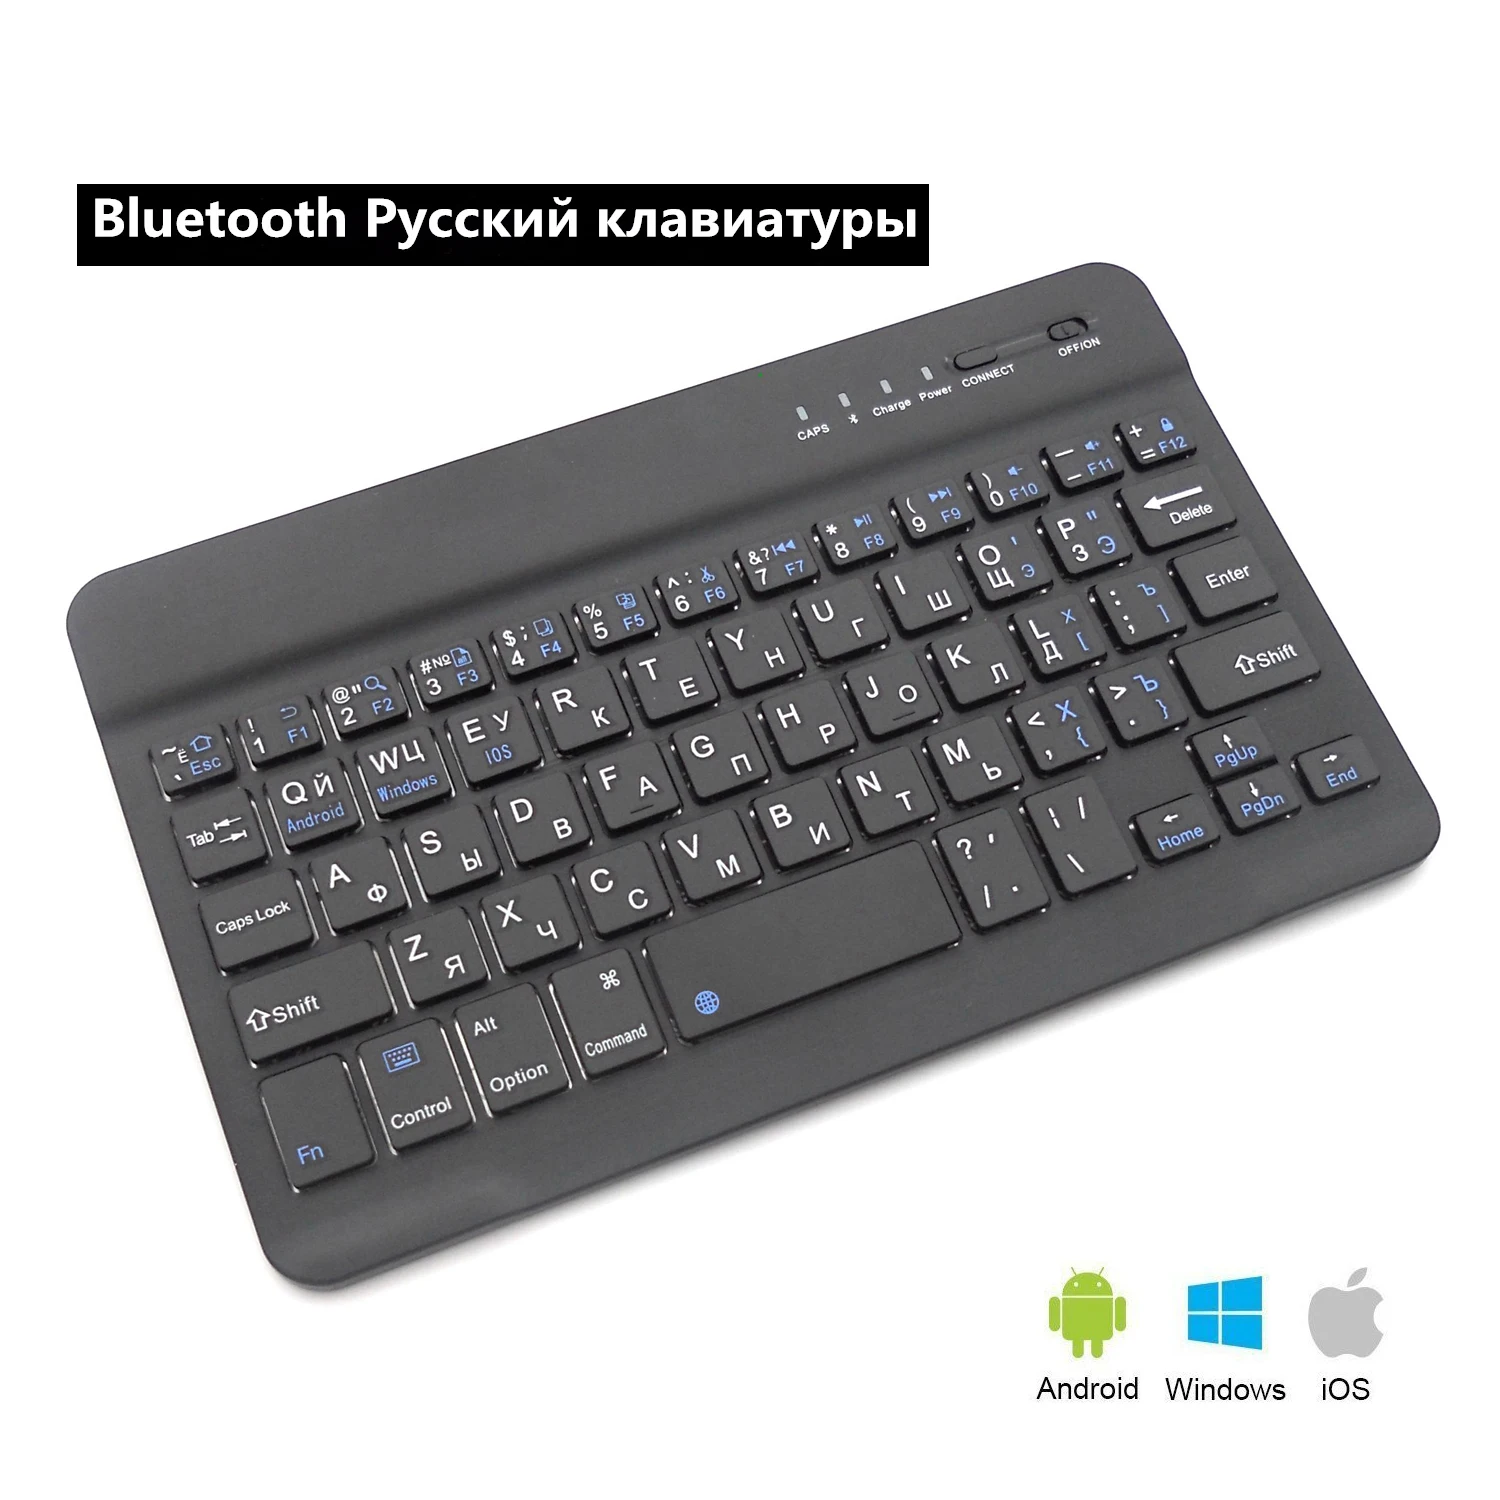 

Russian/English Layout Mini Wireless Bluetooth Keyboard Portable Keyboards for IRBIS Digma Plane Tablet PC 7 inch Black